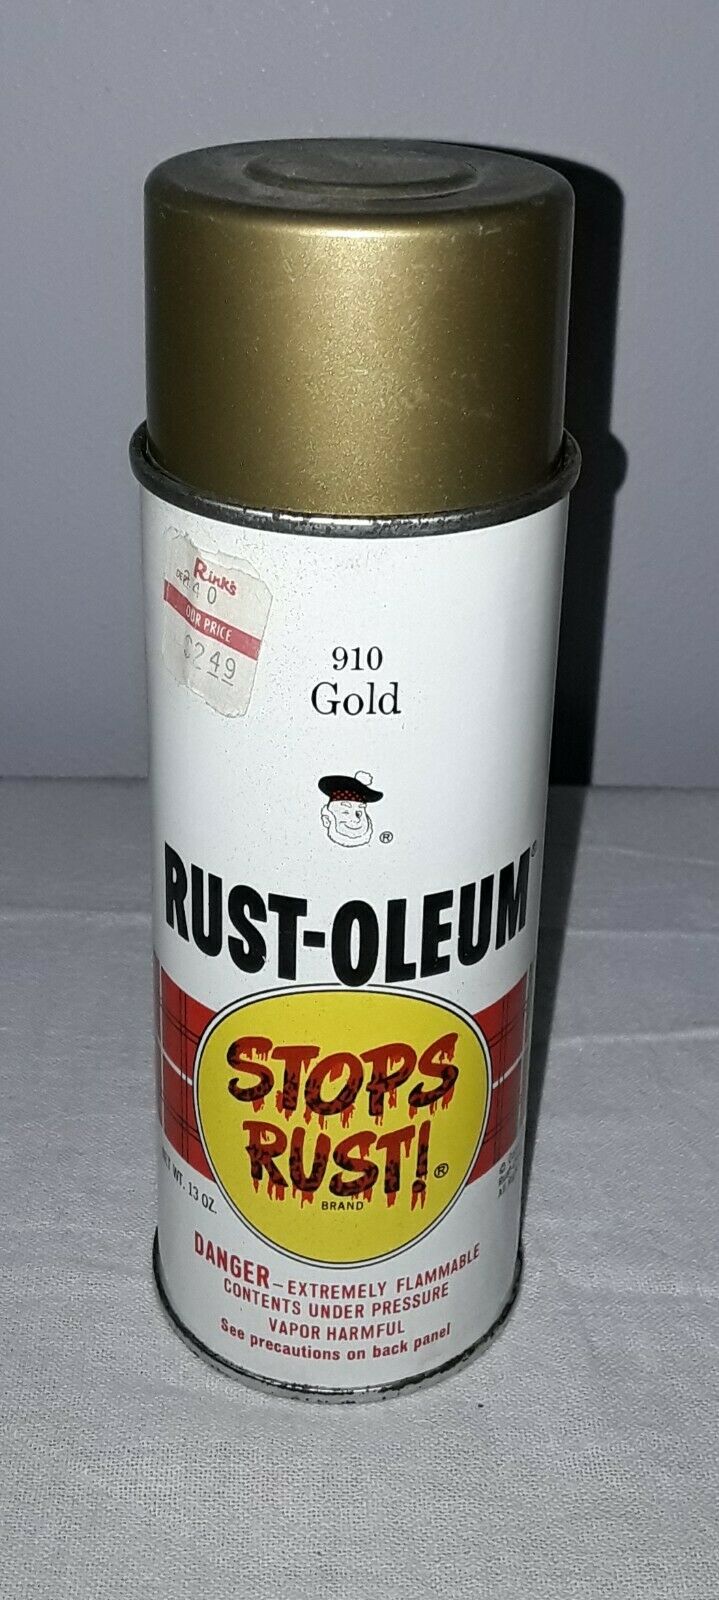 VINTAGE RUST-OLEUM SPRAY PAINT CAN 910 GOLD 1972